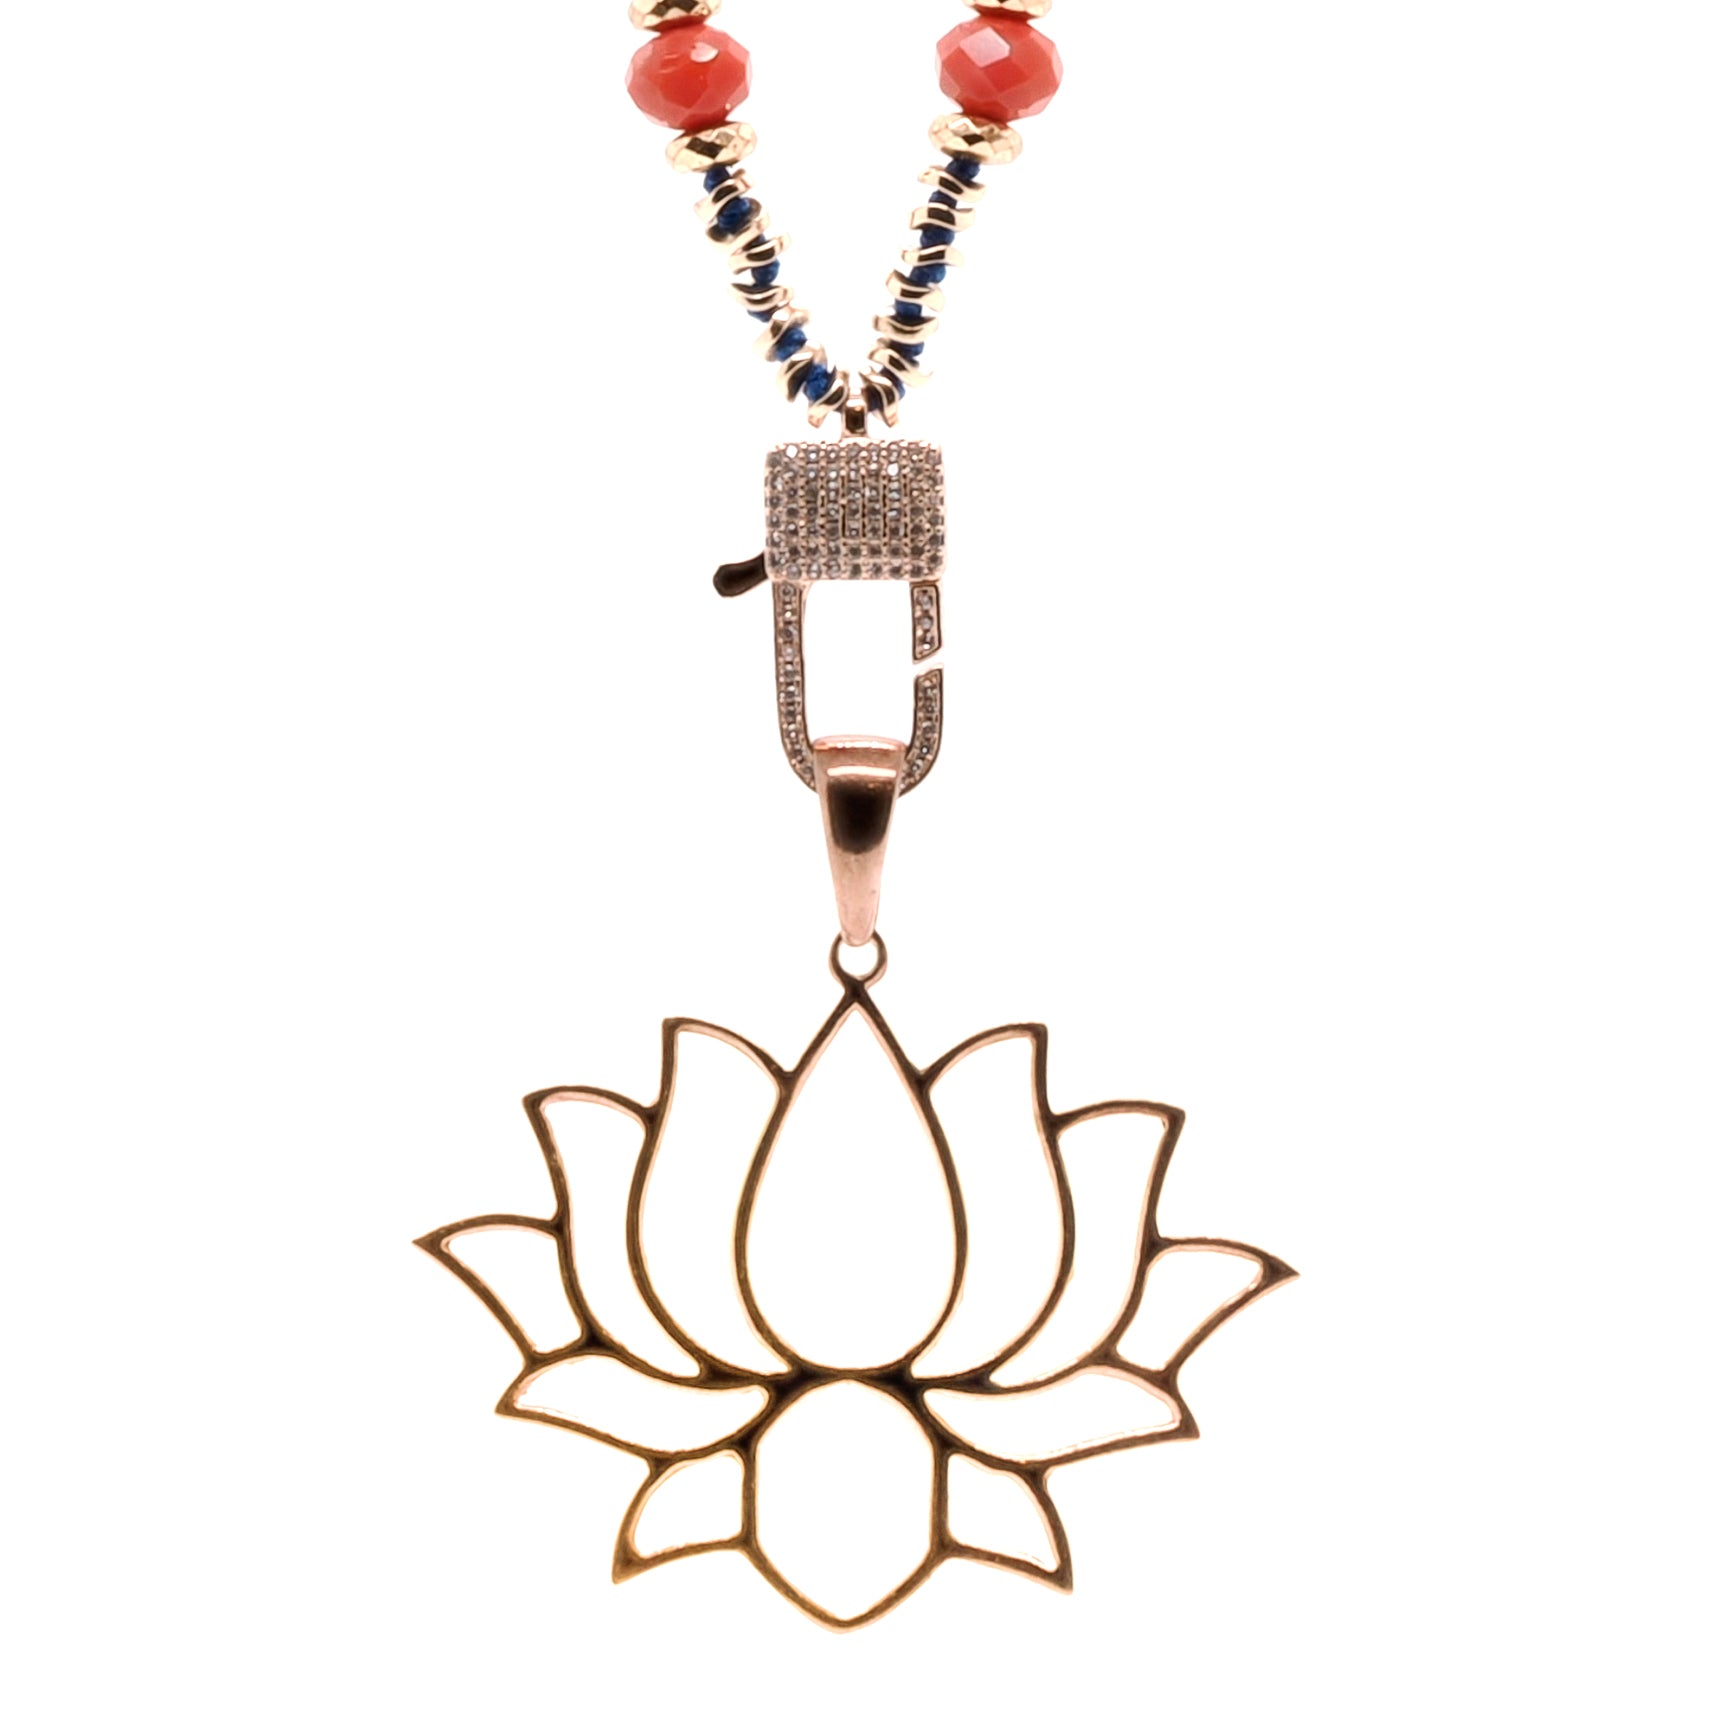 Discover the beauty and meaning of the Lotus Flower Mandala Necklace, handcrafted with Lapis Lazuli and Blue Agate beads, representing spiritual growth and tranquility.